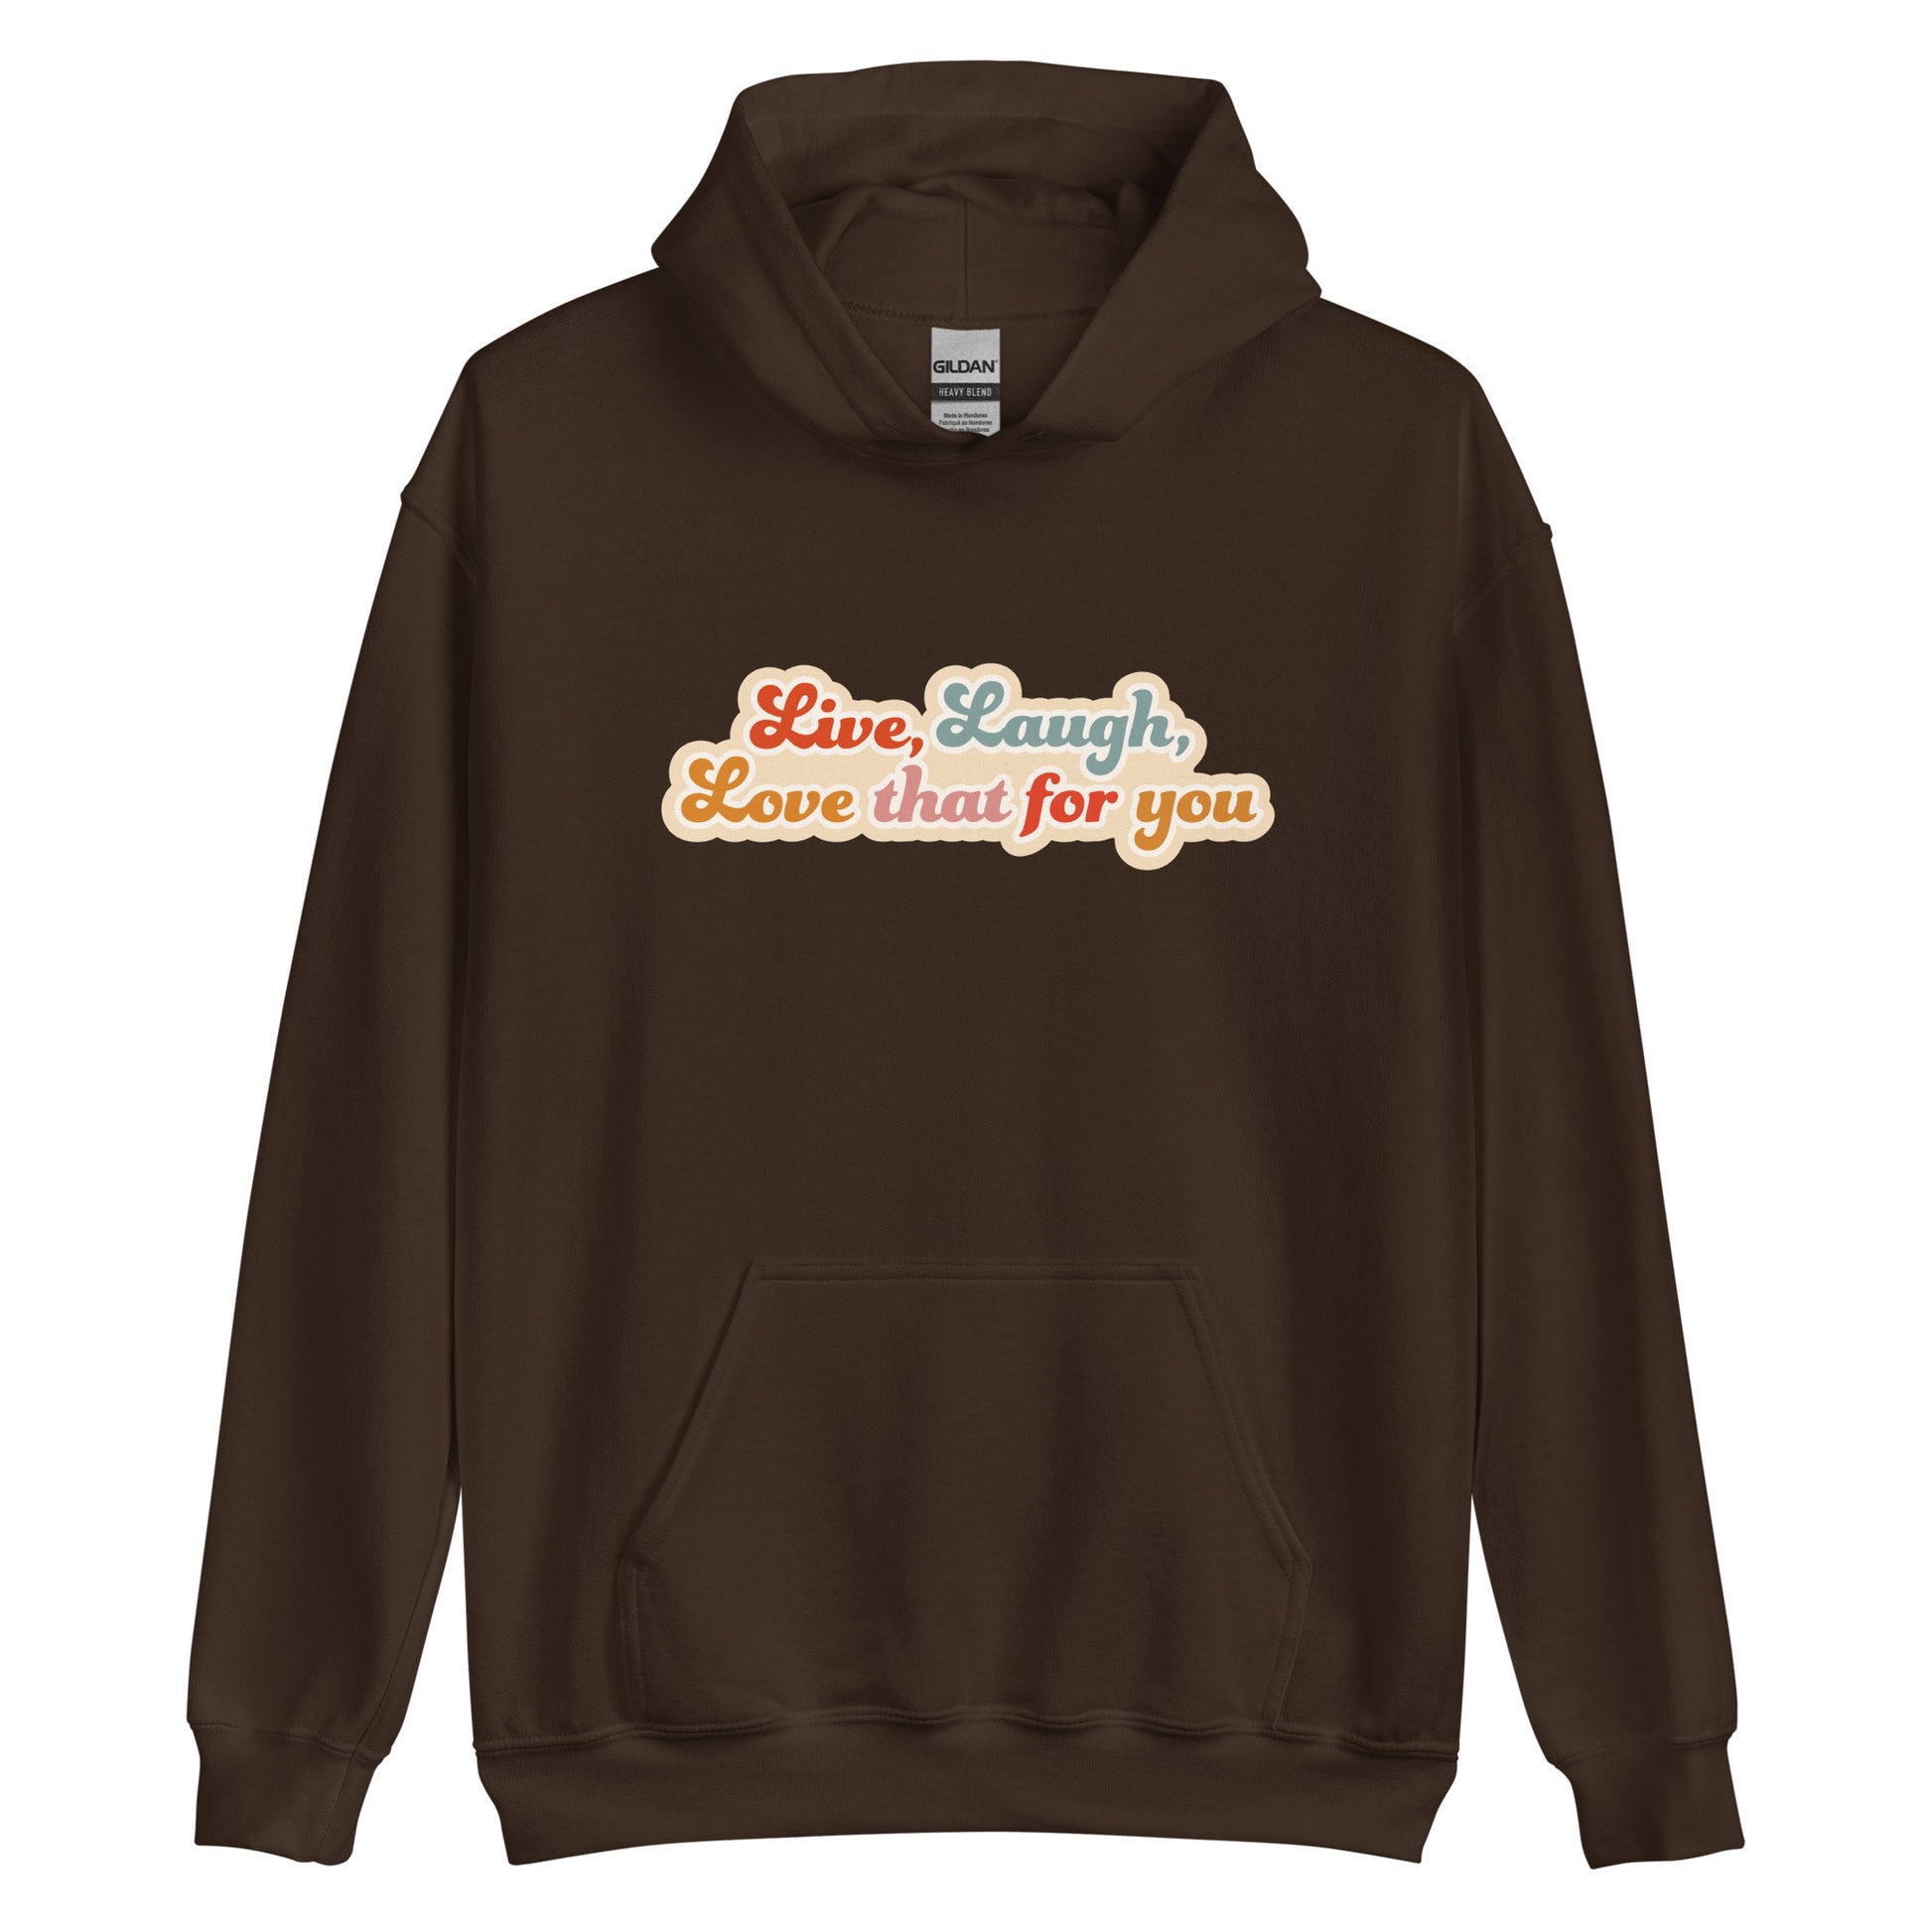 A dark brown hooded sweatshirt featuring colorful, cursive text that reads "Live, Laugh, Love that for you."